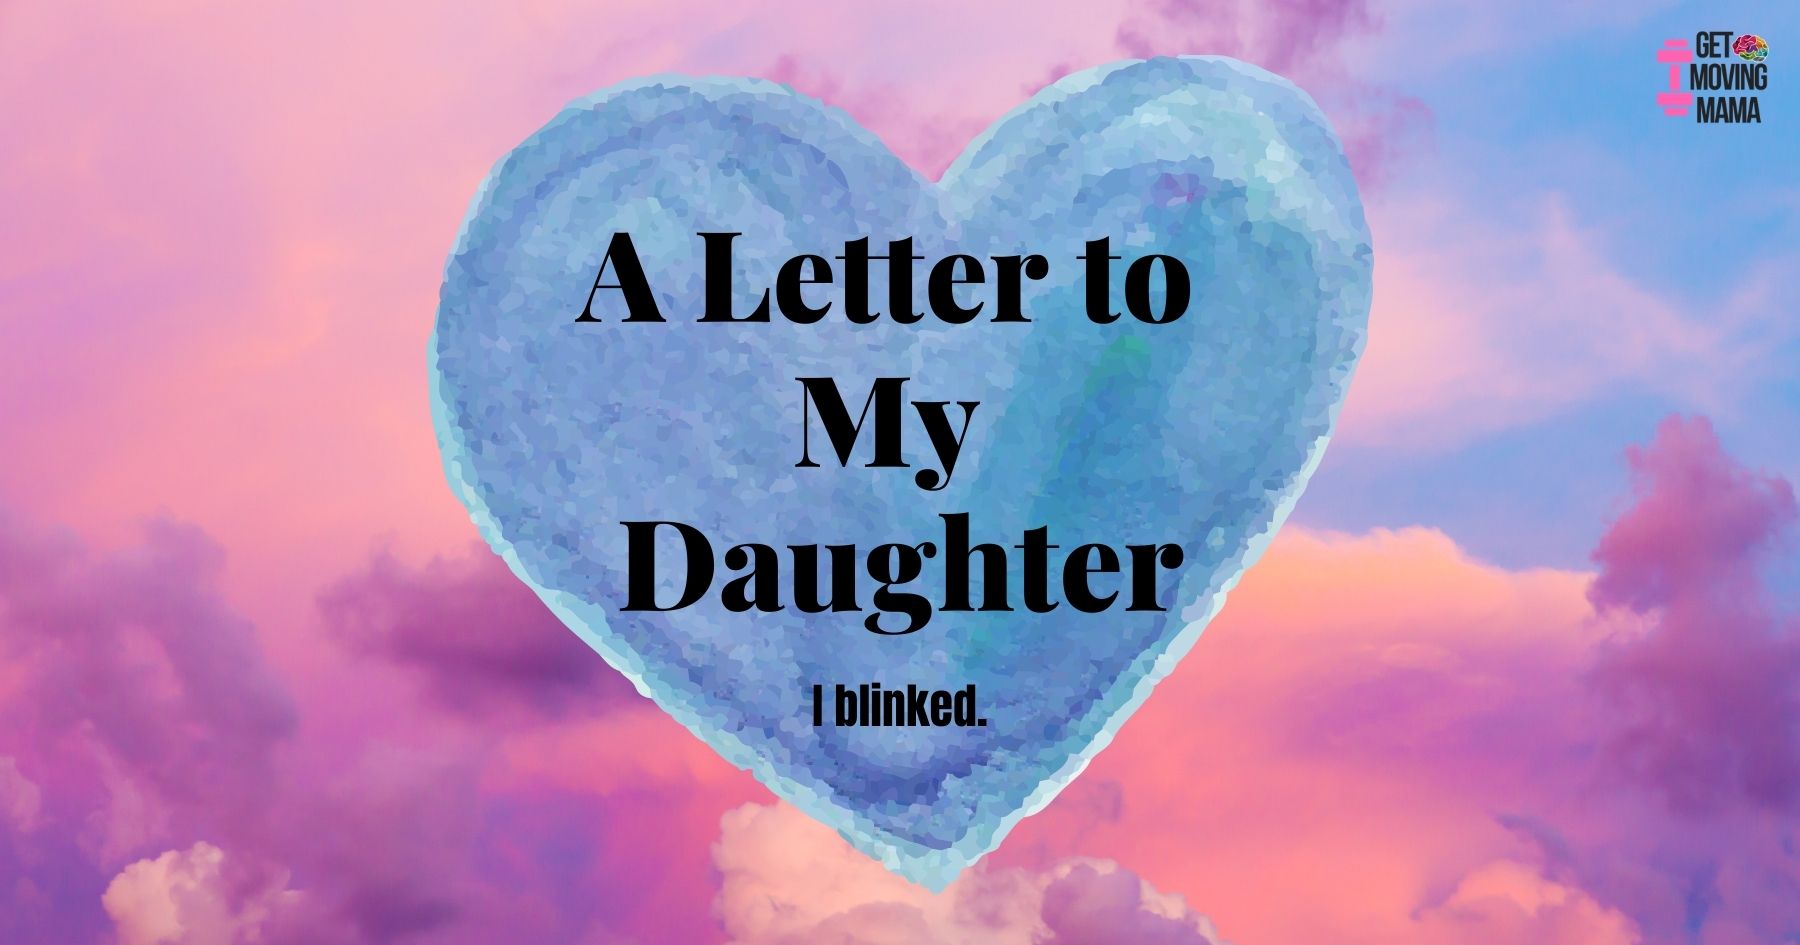 get-moving-mama-A-Letter-to-My-Daughter